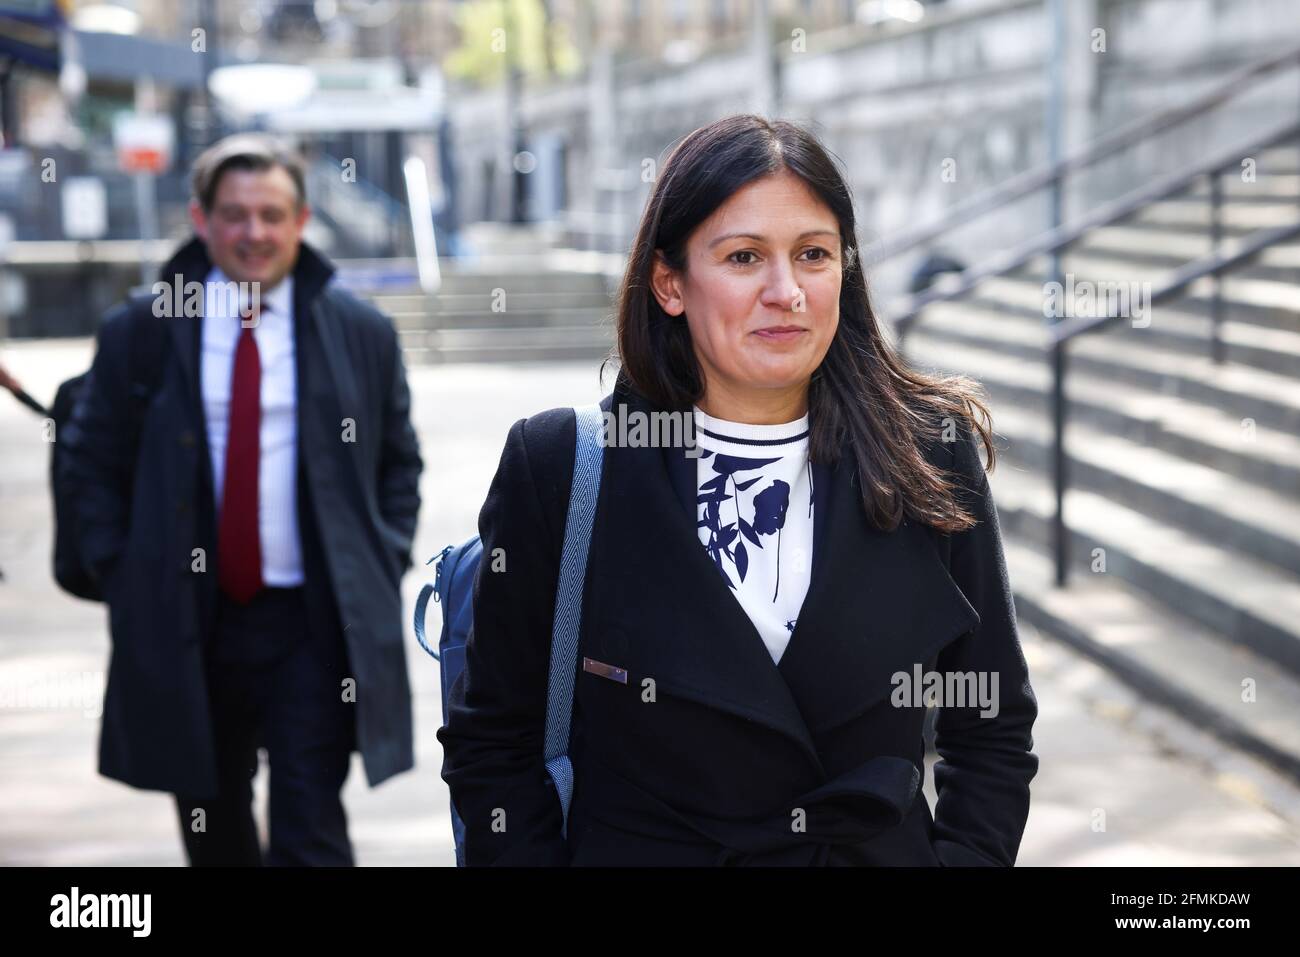 Britain S Labour Party S Jonathan Ashworth And Lisa Nandy Walk Through Westminster In London Britain May 10 21 Reuters Henry Nicholls Stock Photo Alamy